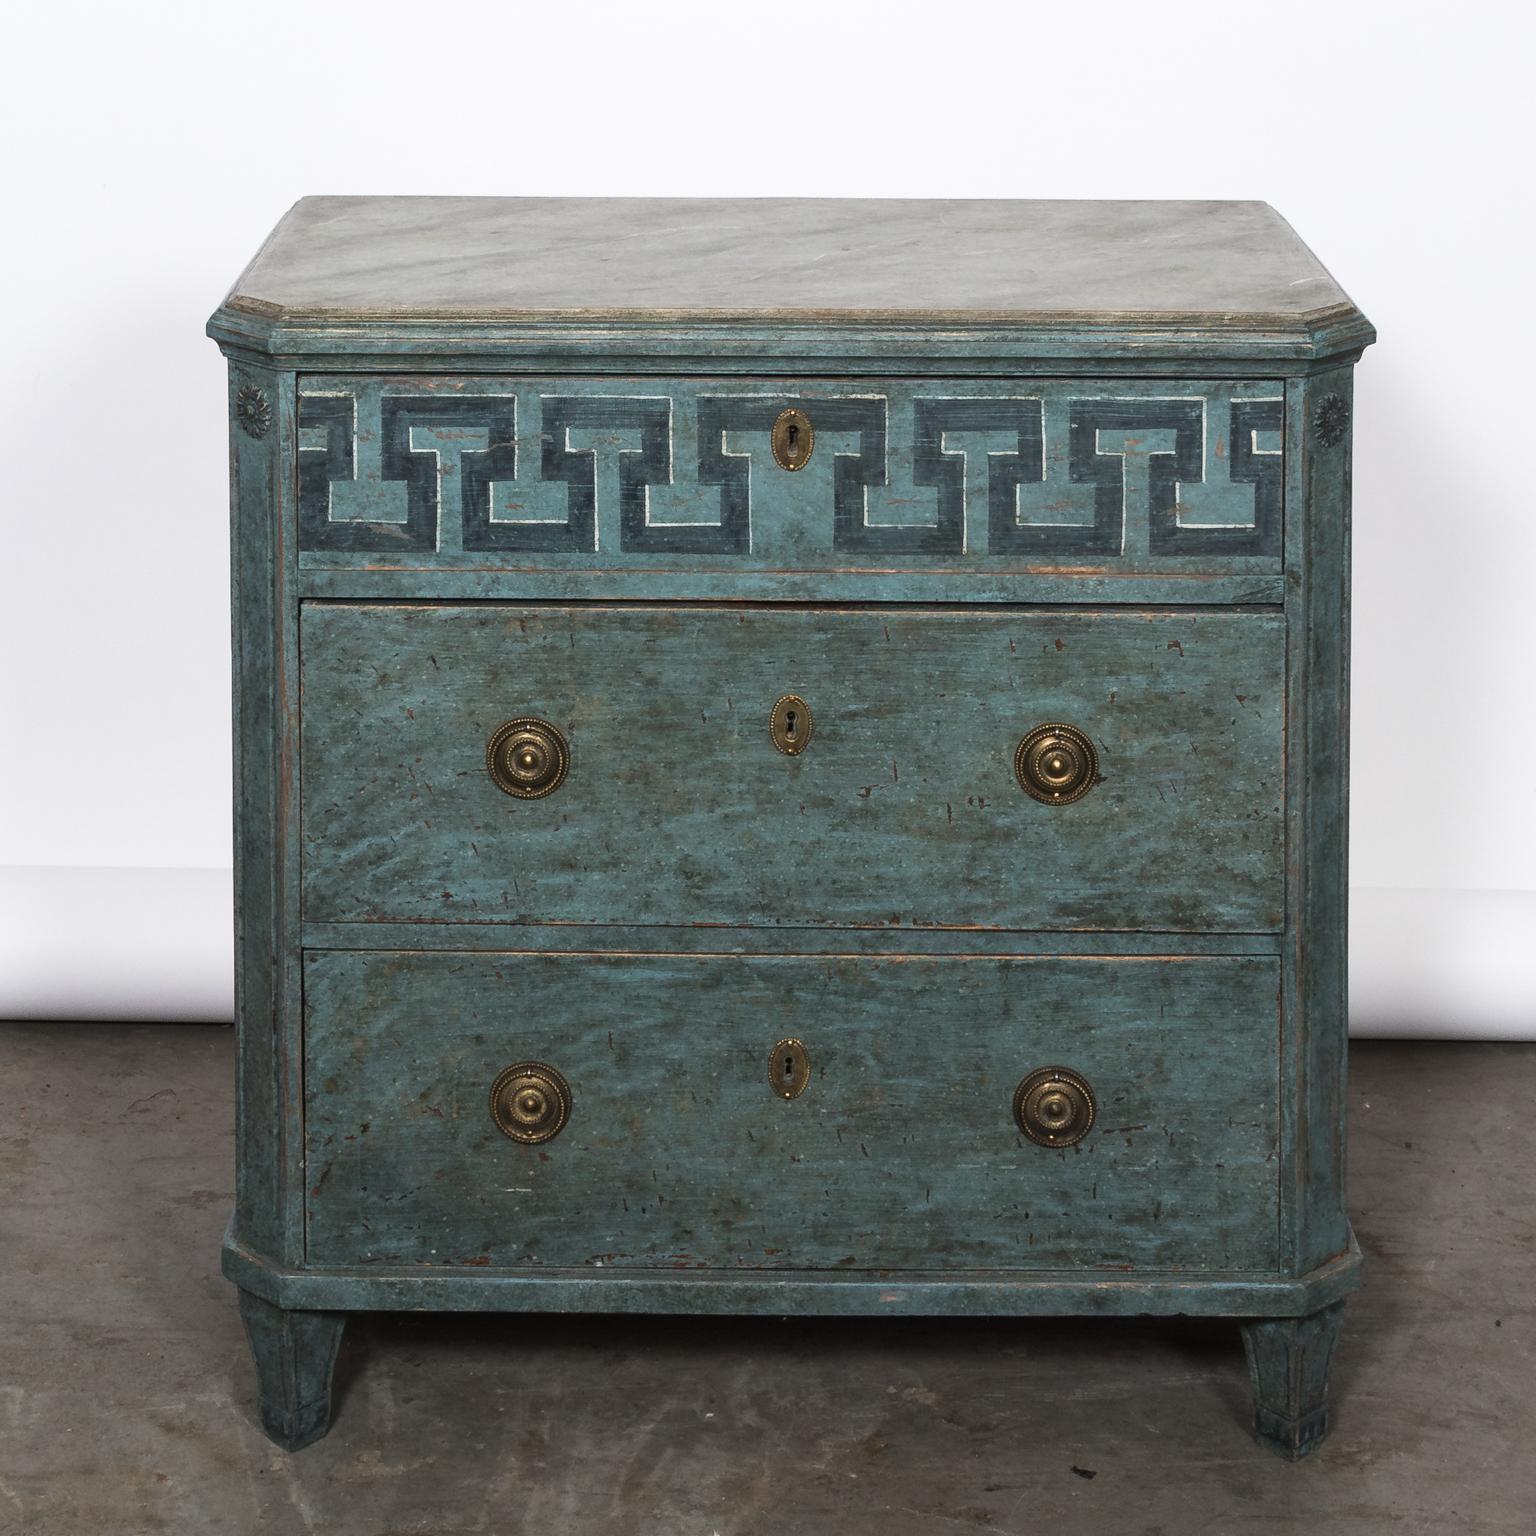 Pair of Swedish blue painted commodes in the Gustavian style with Greek key trim and brass hardware, circa 19th century.